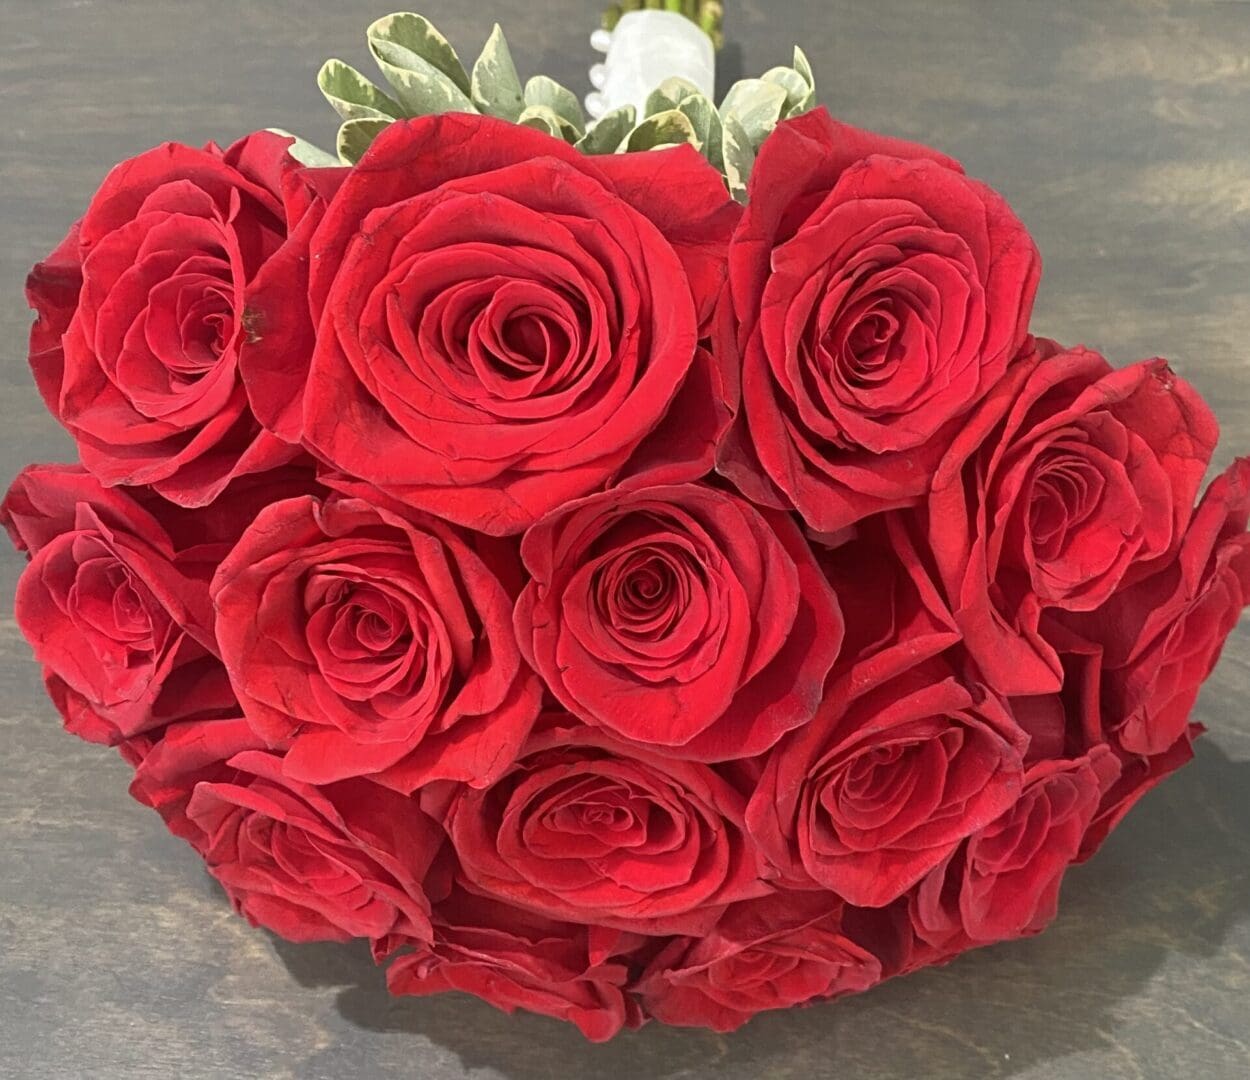 A bundle of large red roses